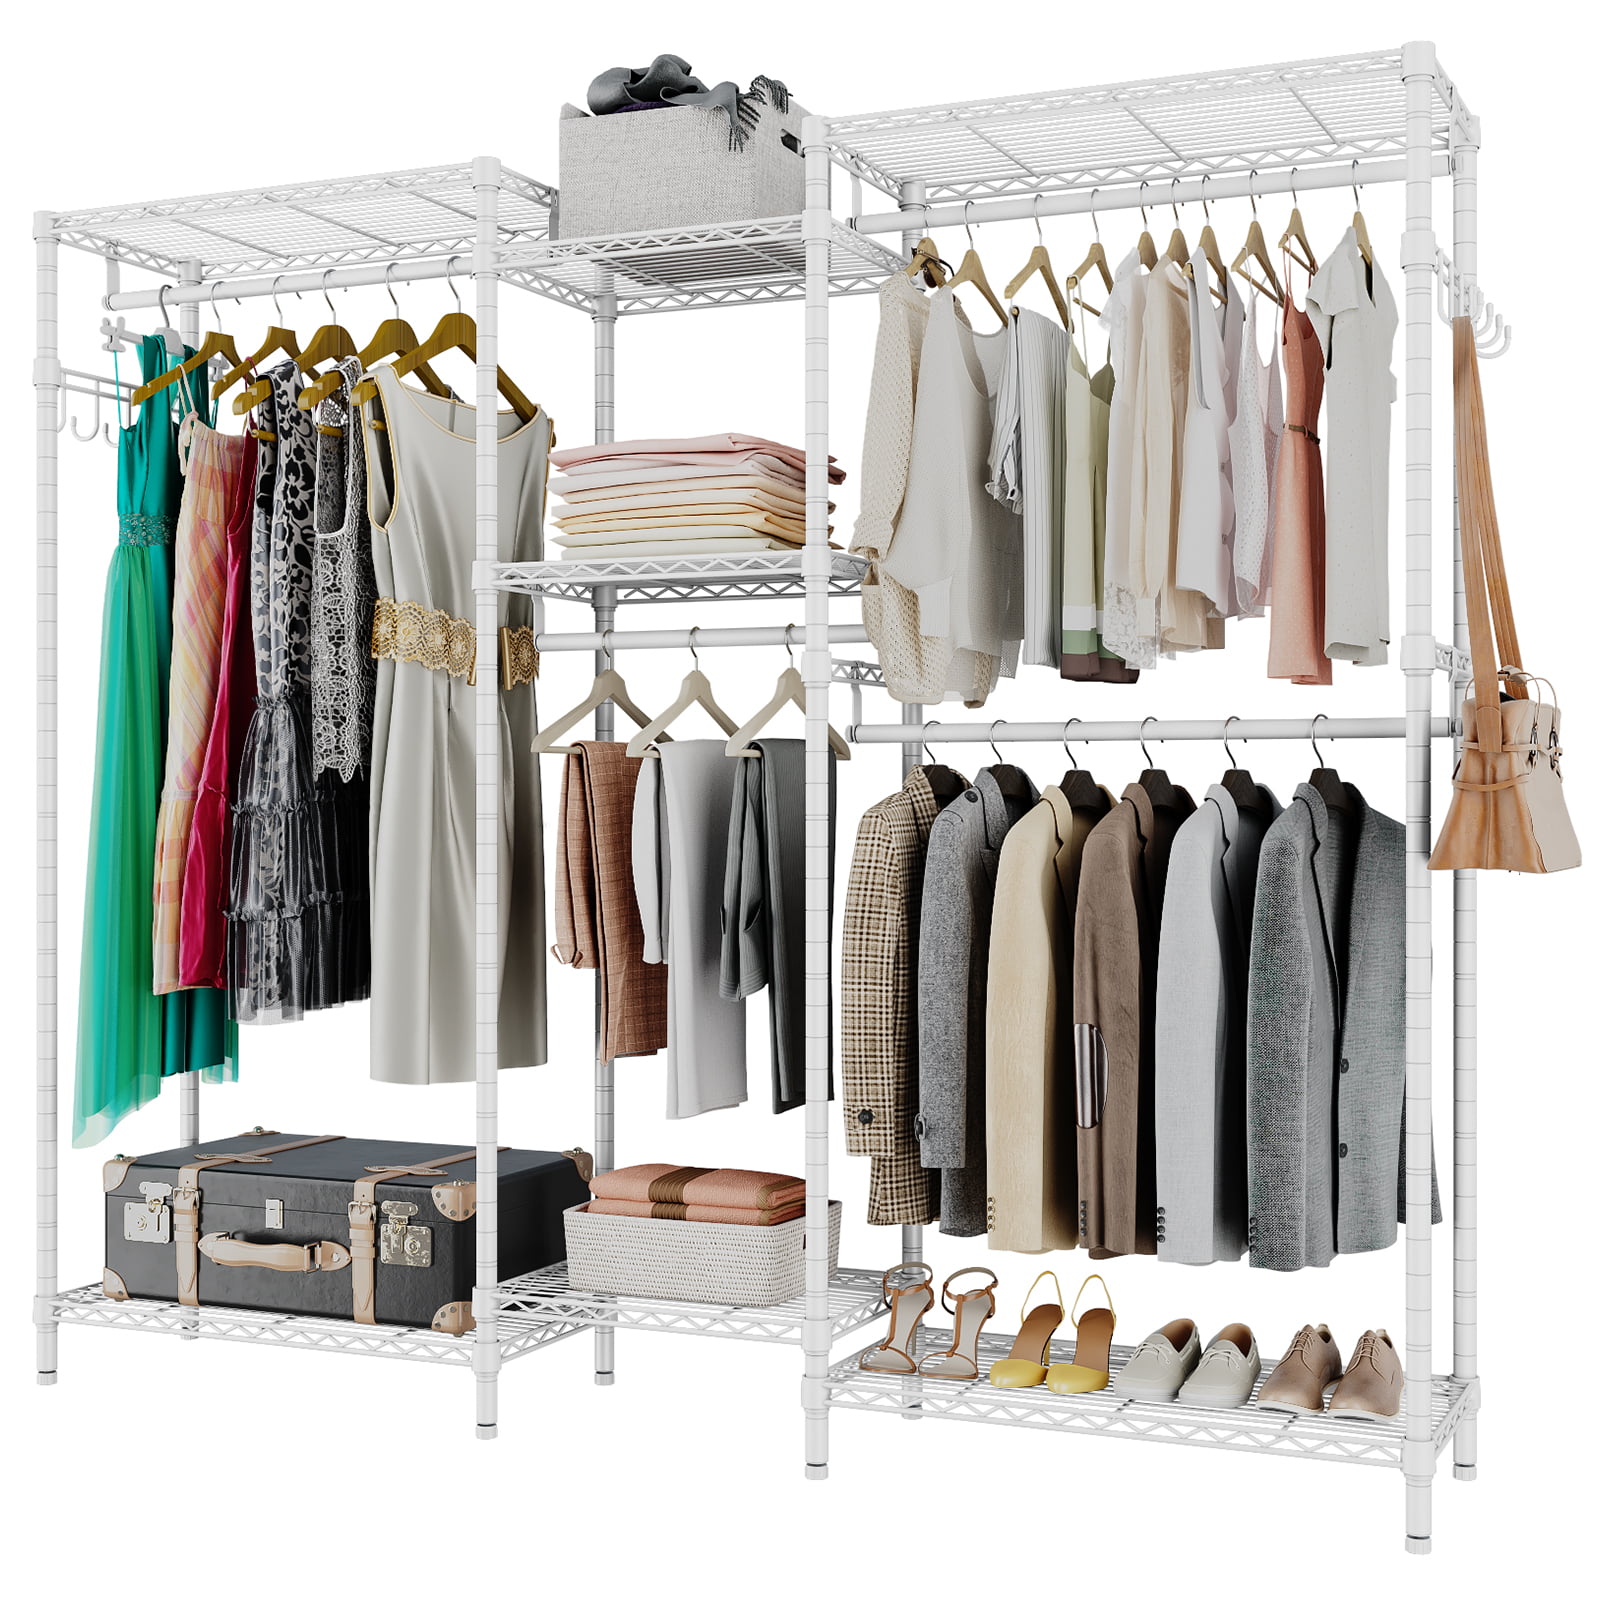 JustRoomy Handing Garment Clothes Rack, -Hold Up to 800 Lbs, White ...